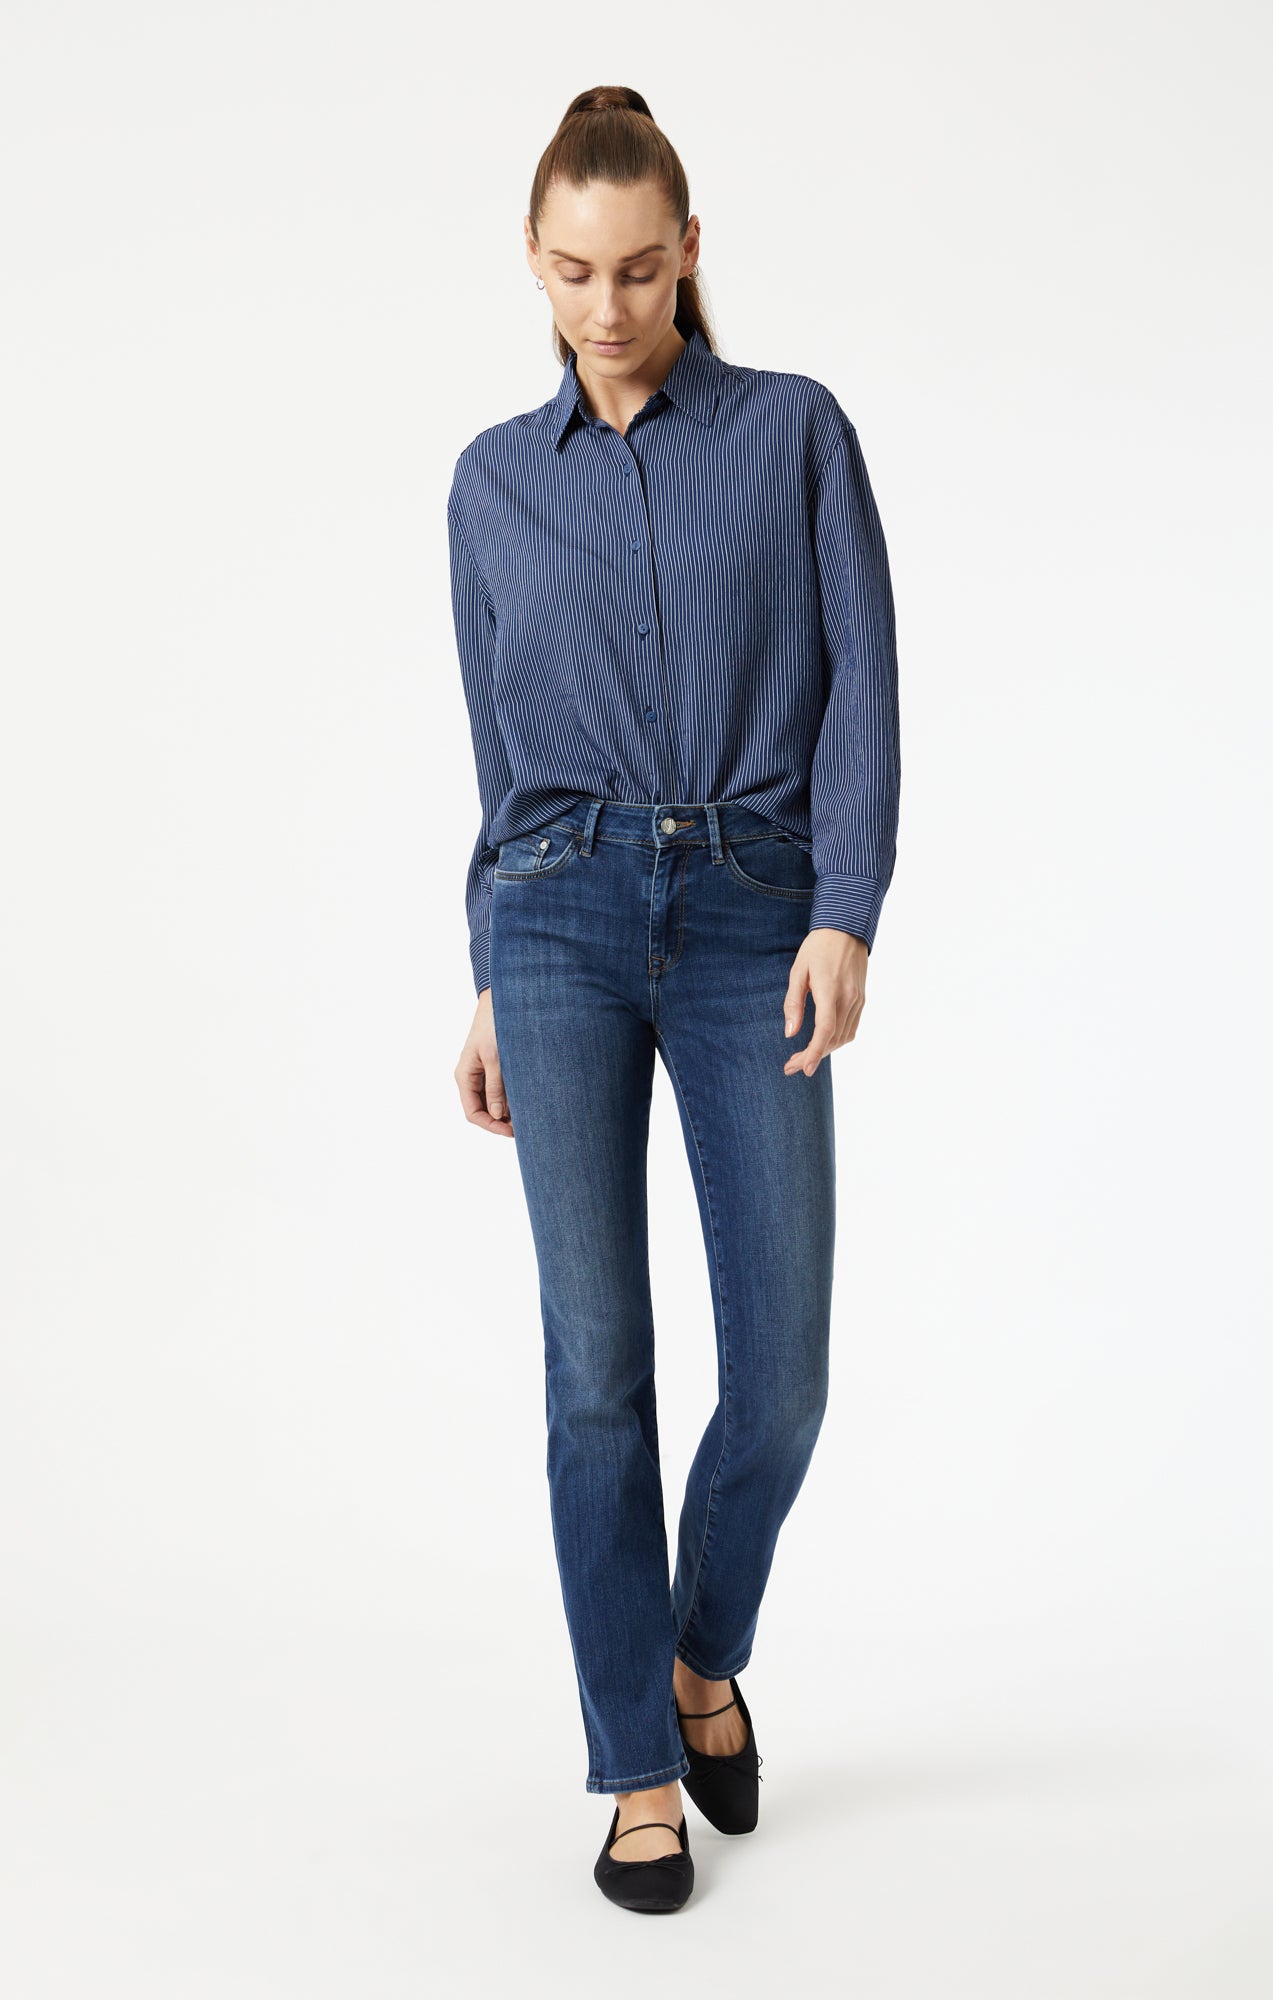 Something Missing Low Rise Flare Jeans - Light Blue Wash